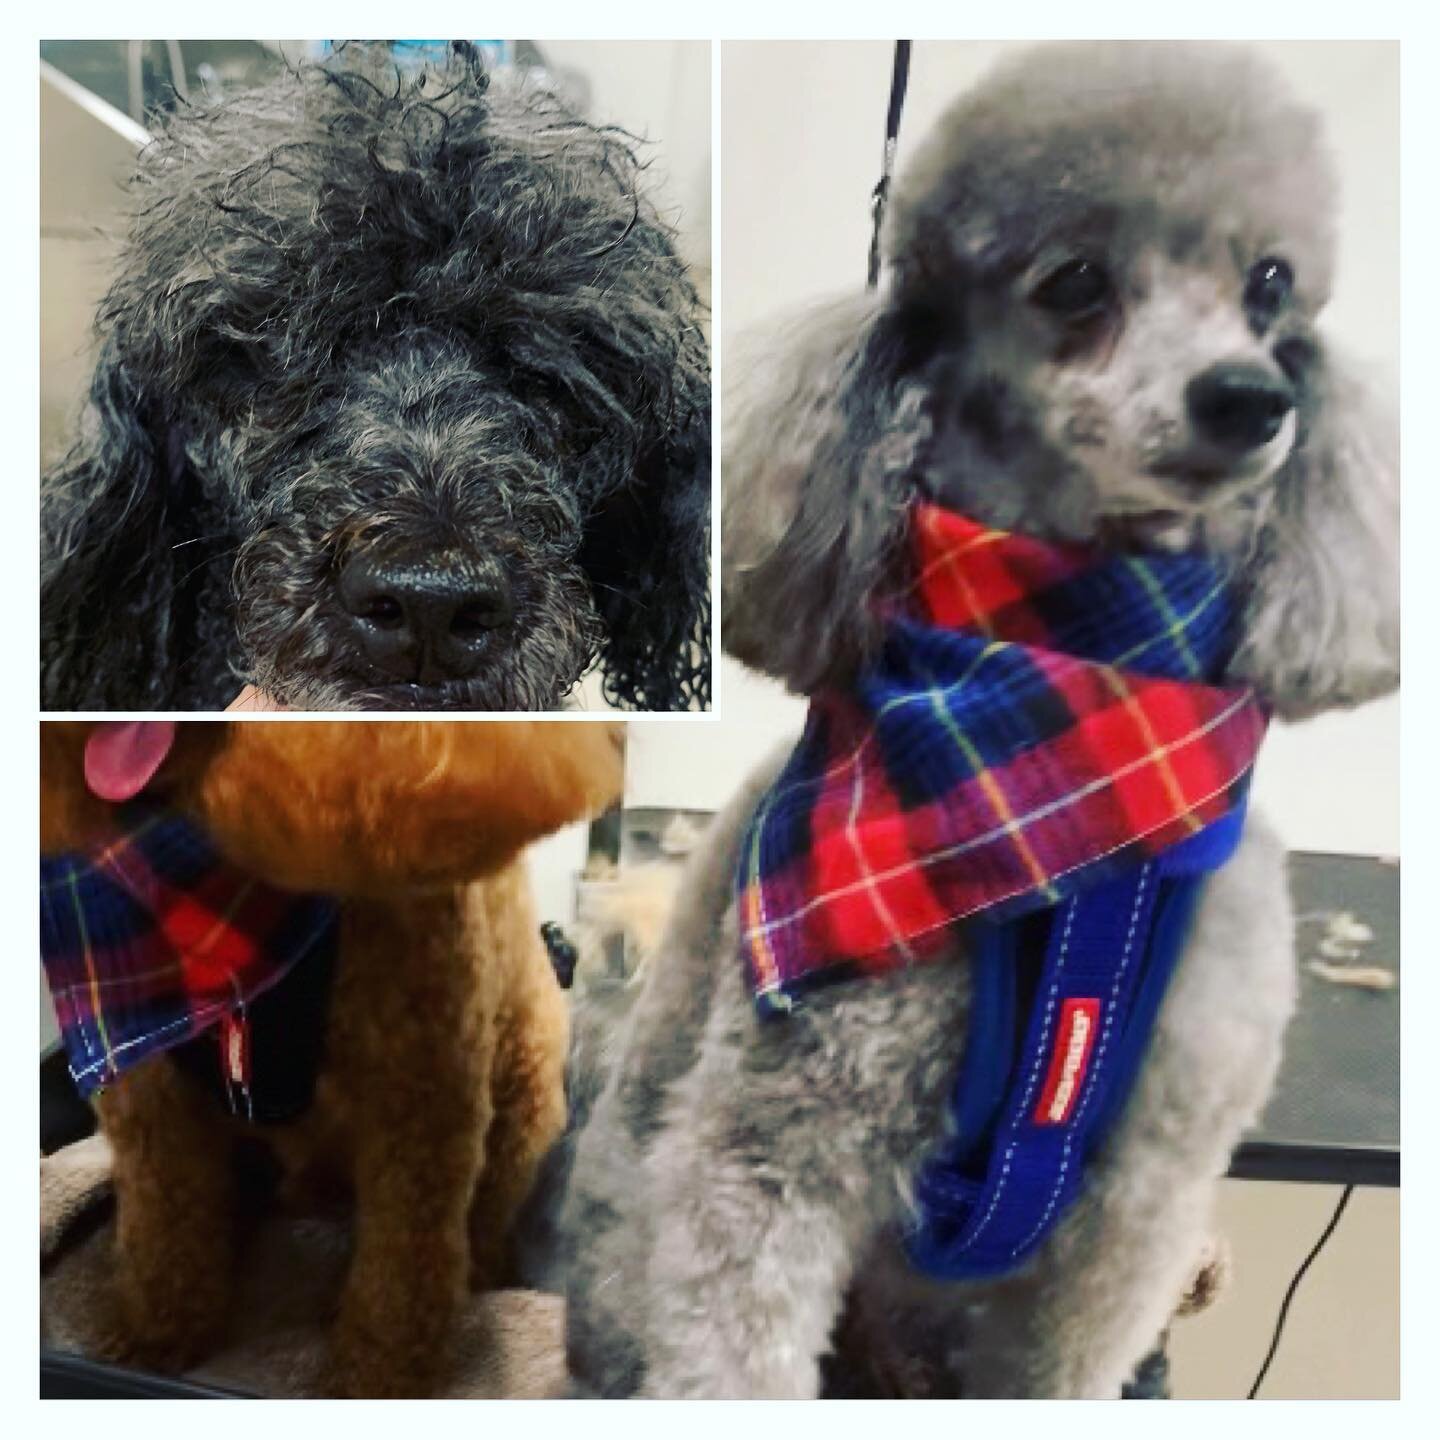 Maggie deserved a little TLC 🫶 

#groomersofinstagram #doggroomers #doggrooming #petstylist #petgrooming #poodle #poodlegrooming #puppypawlour #doghaircut #groomersofsydney #innerwest #doggroomersofinstagram